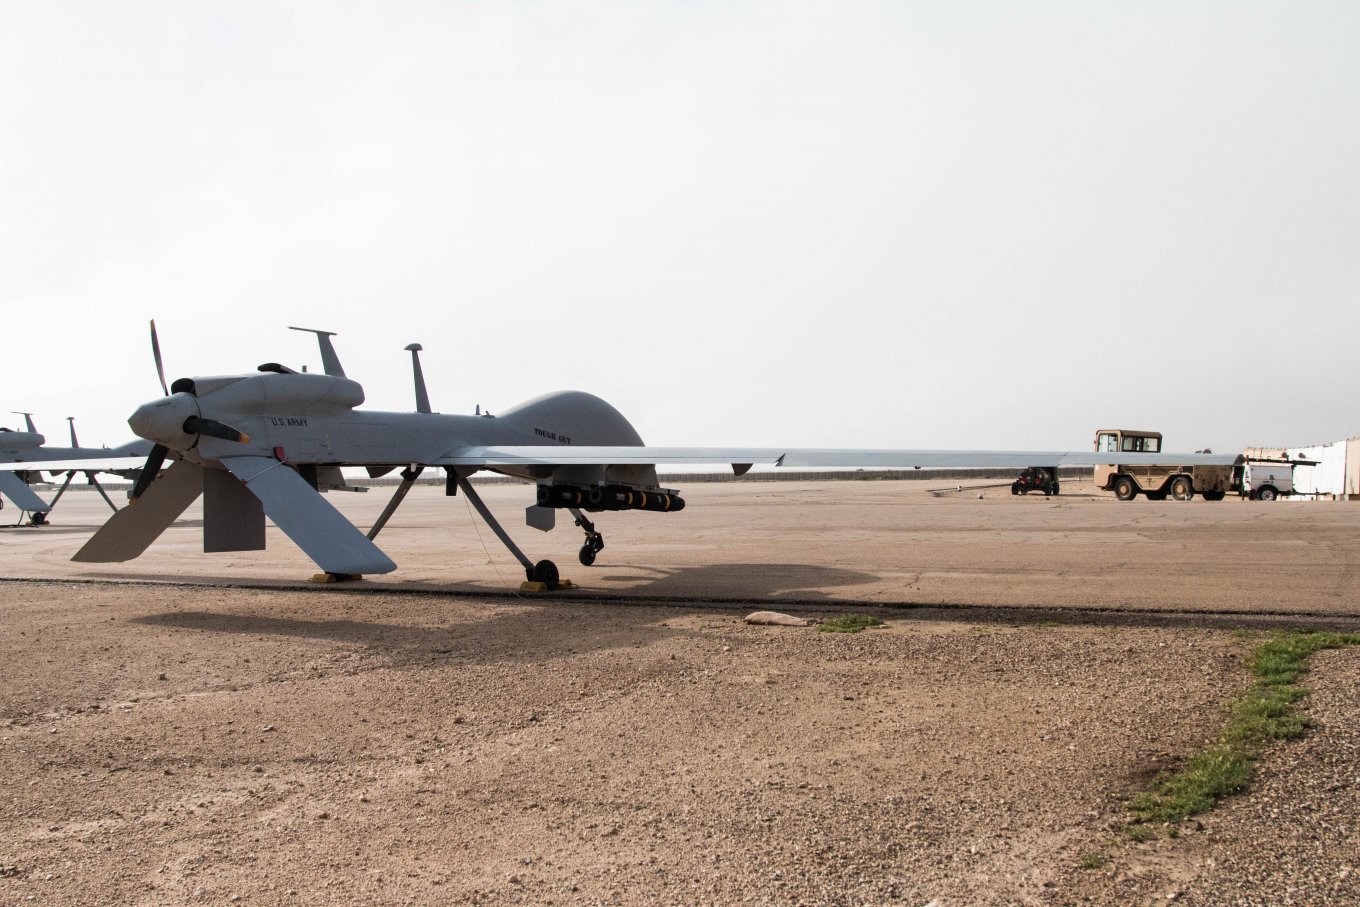 MQ-1C Gray Eagle unmanned aerial vehicle